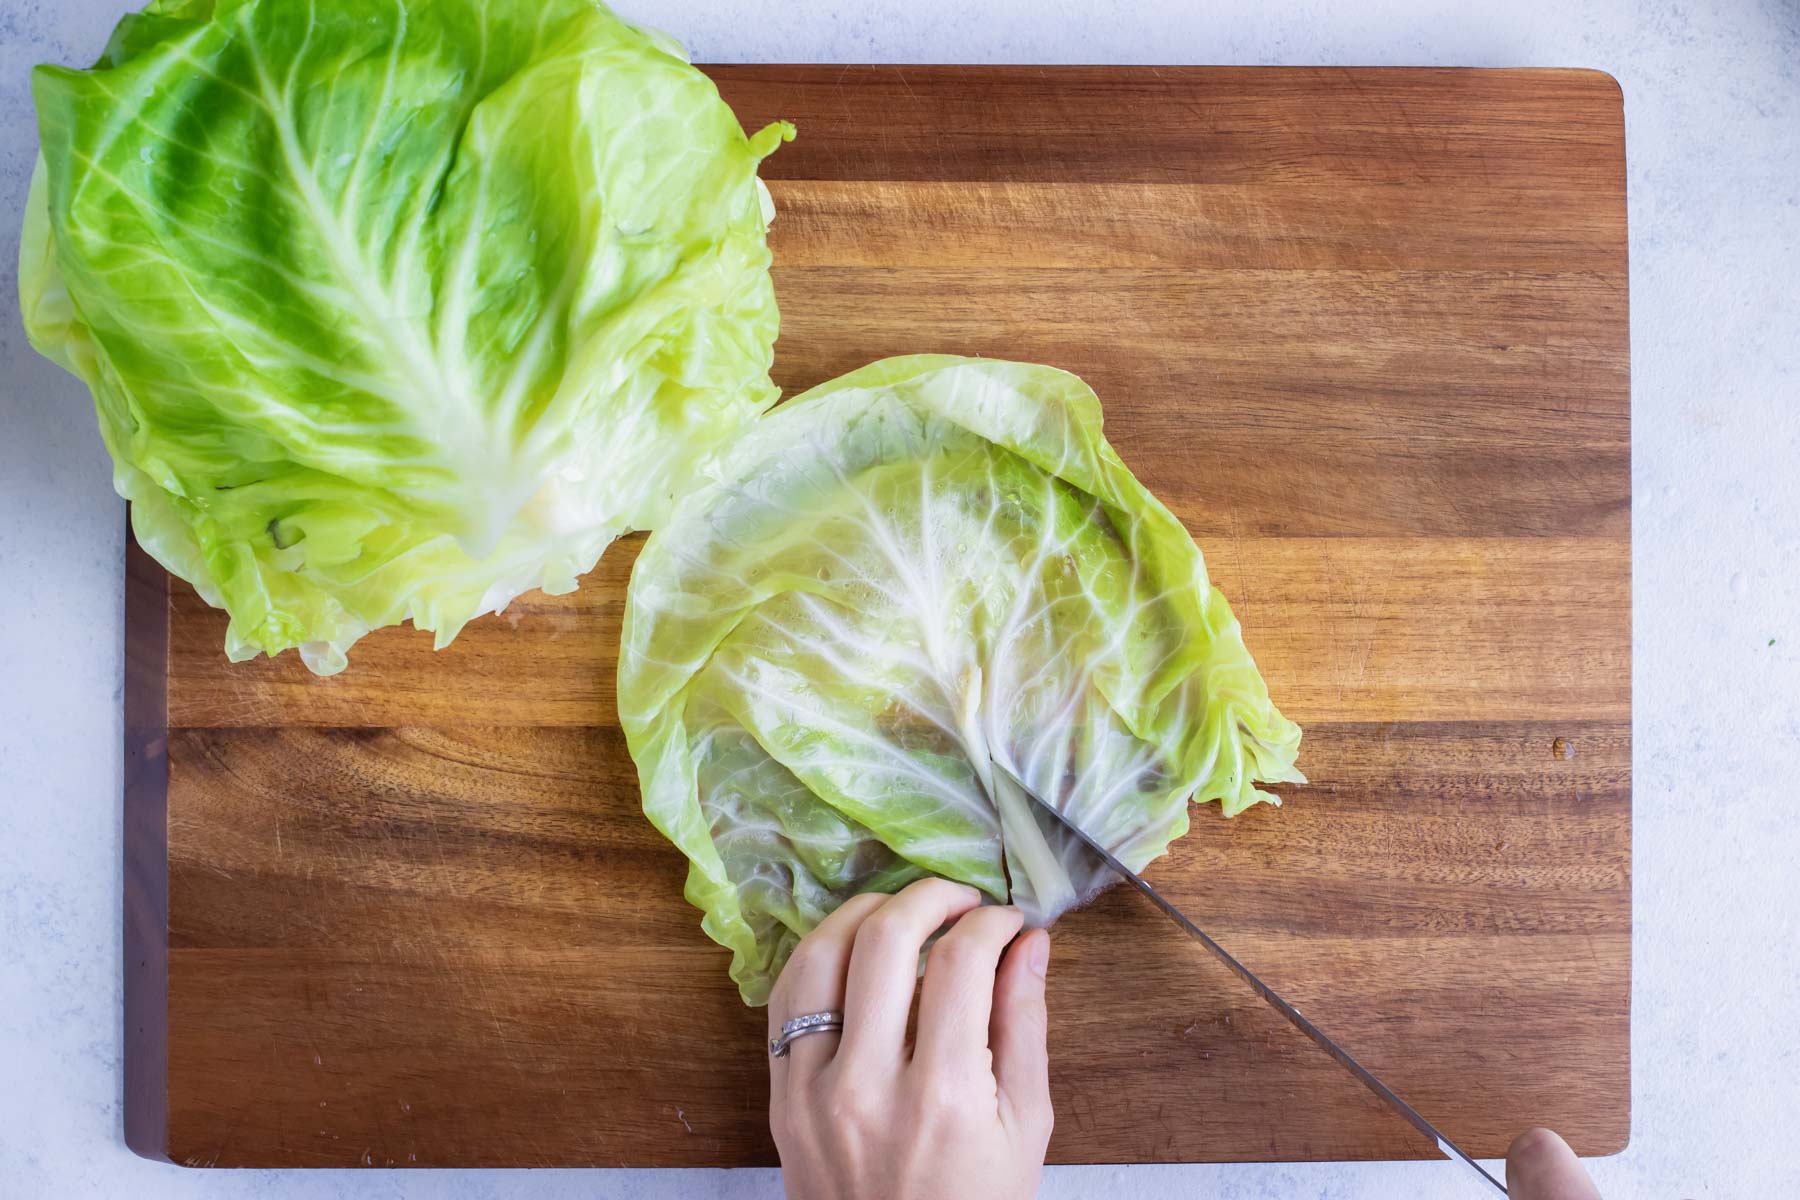 Cabbage leaf is cut down the bottom middle.